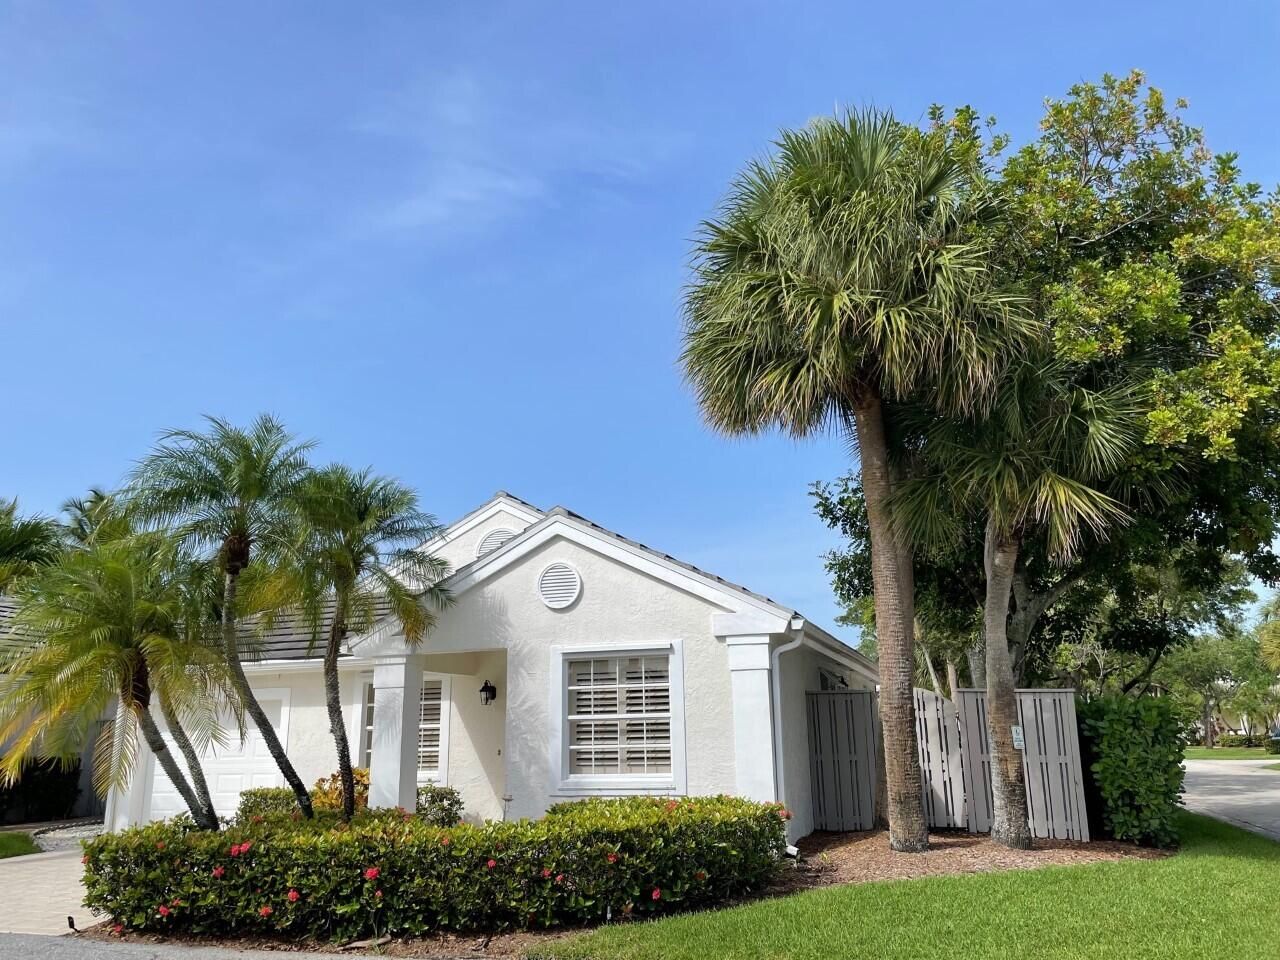 Ibis Golf And Country Club - West Palm Beach, FL Homes for Sale & Real  Estate | neighborhoods.com